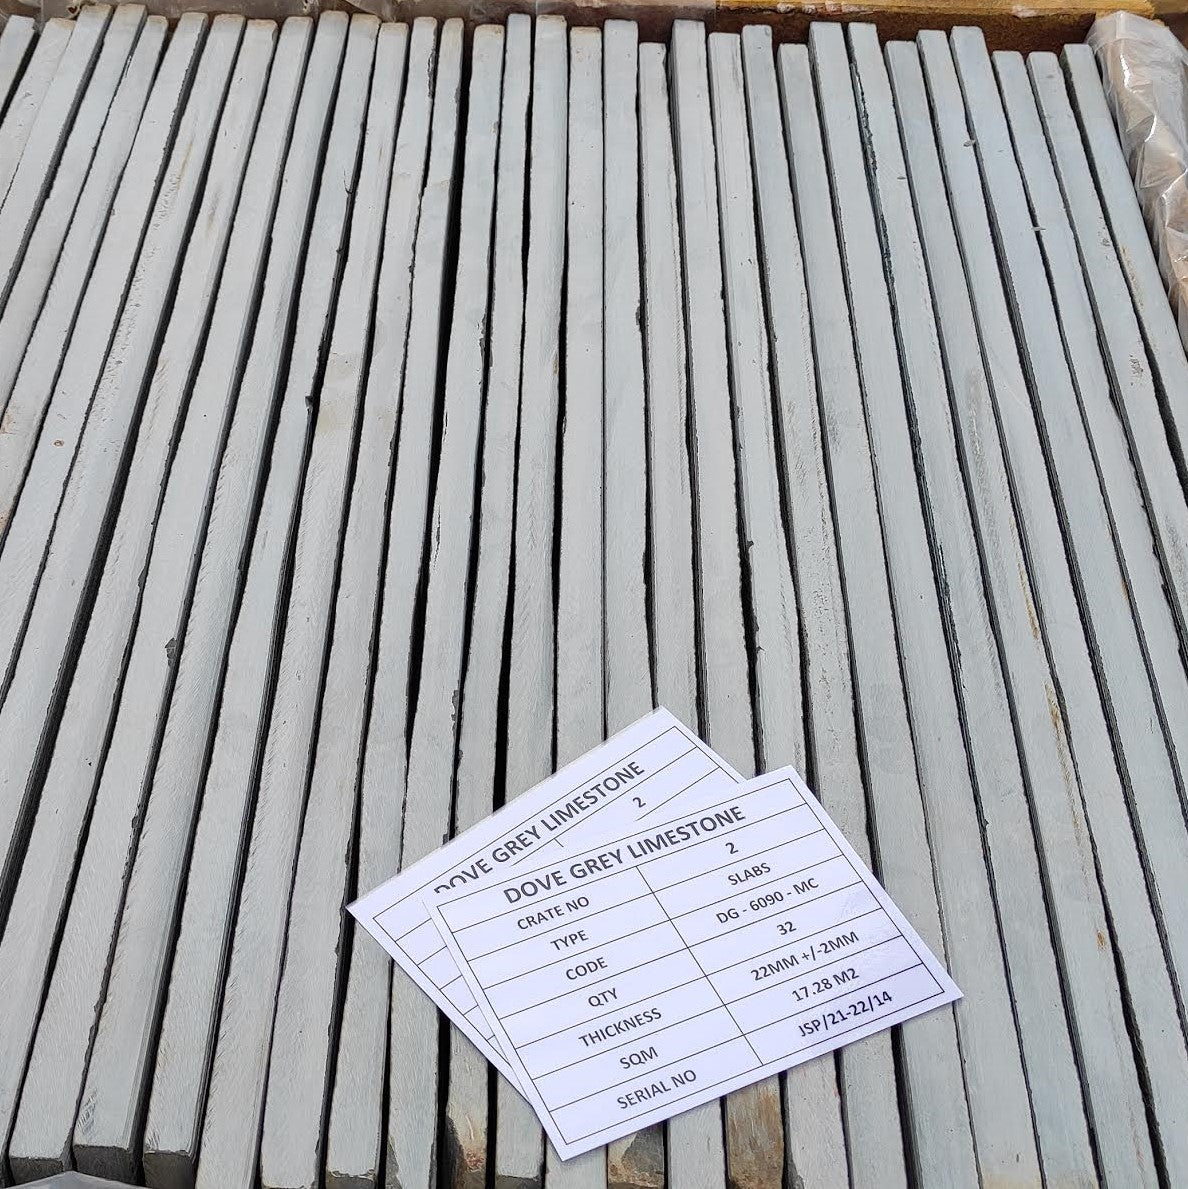 Dove Grey Limestone Paving Slabs 900 x 600 x 22mm, £28.05/m2 | Delivered